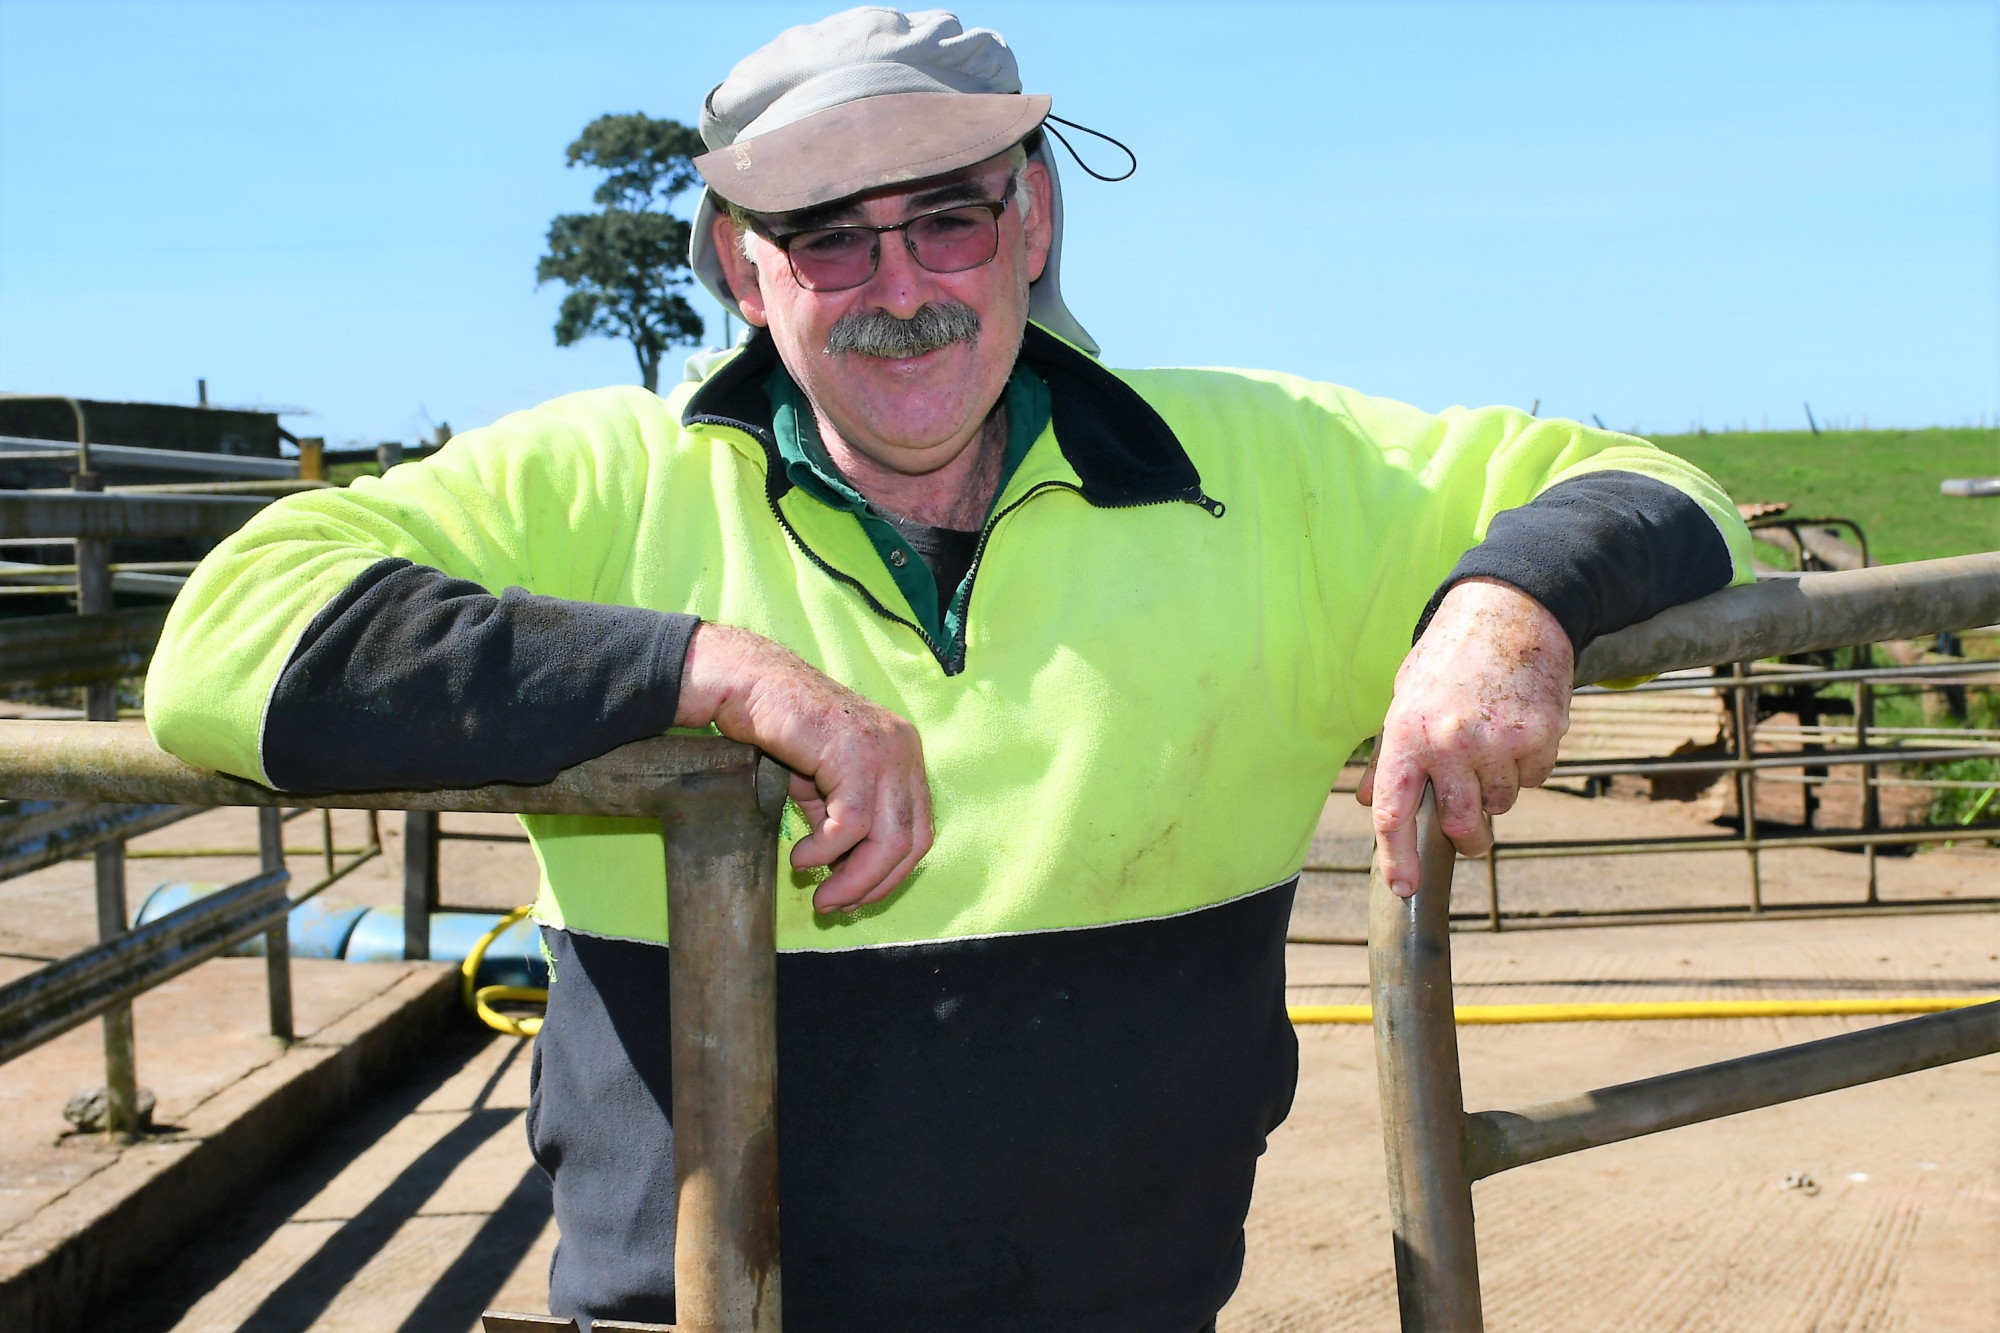 Millaa Millaa farmer James Geraghty said the Bega Cheese purchase is great news for dairy farmers on the Tablelands.